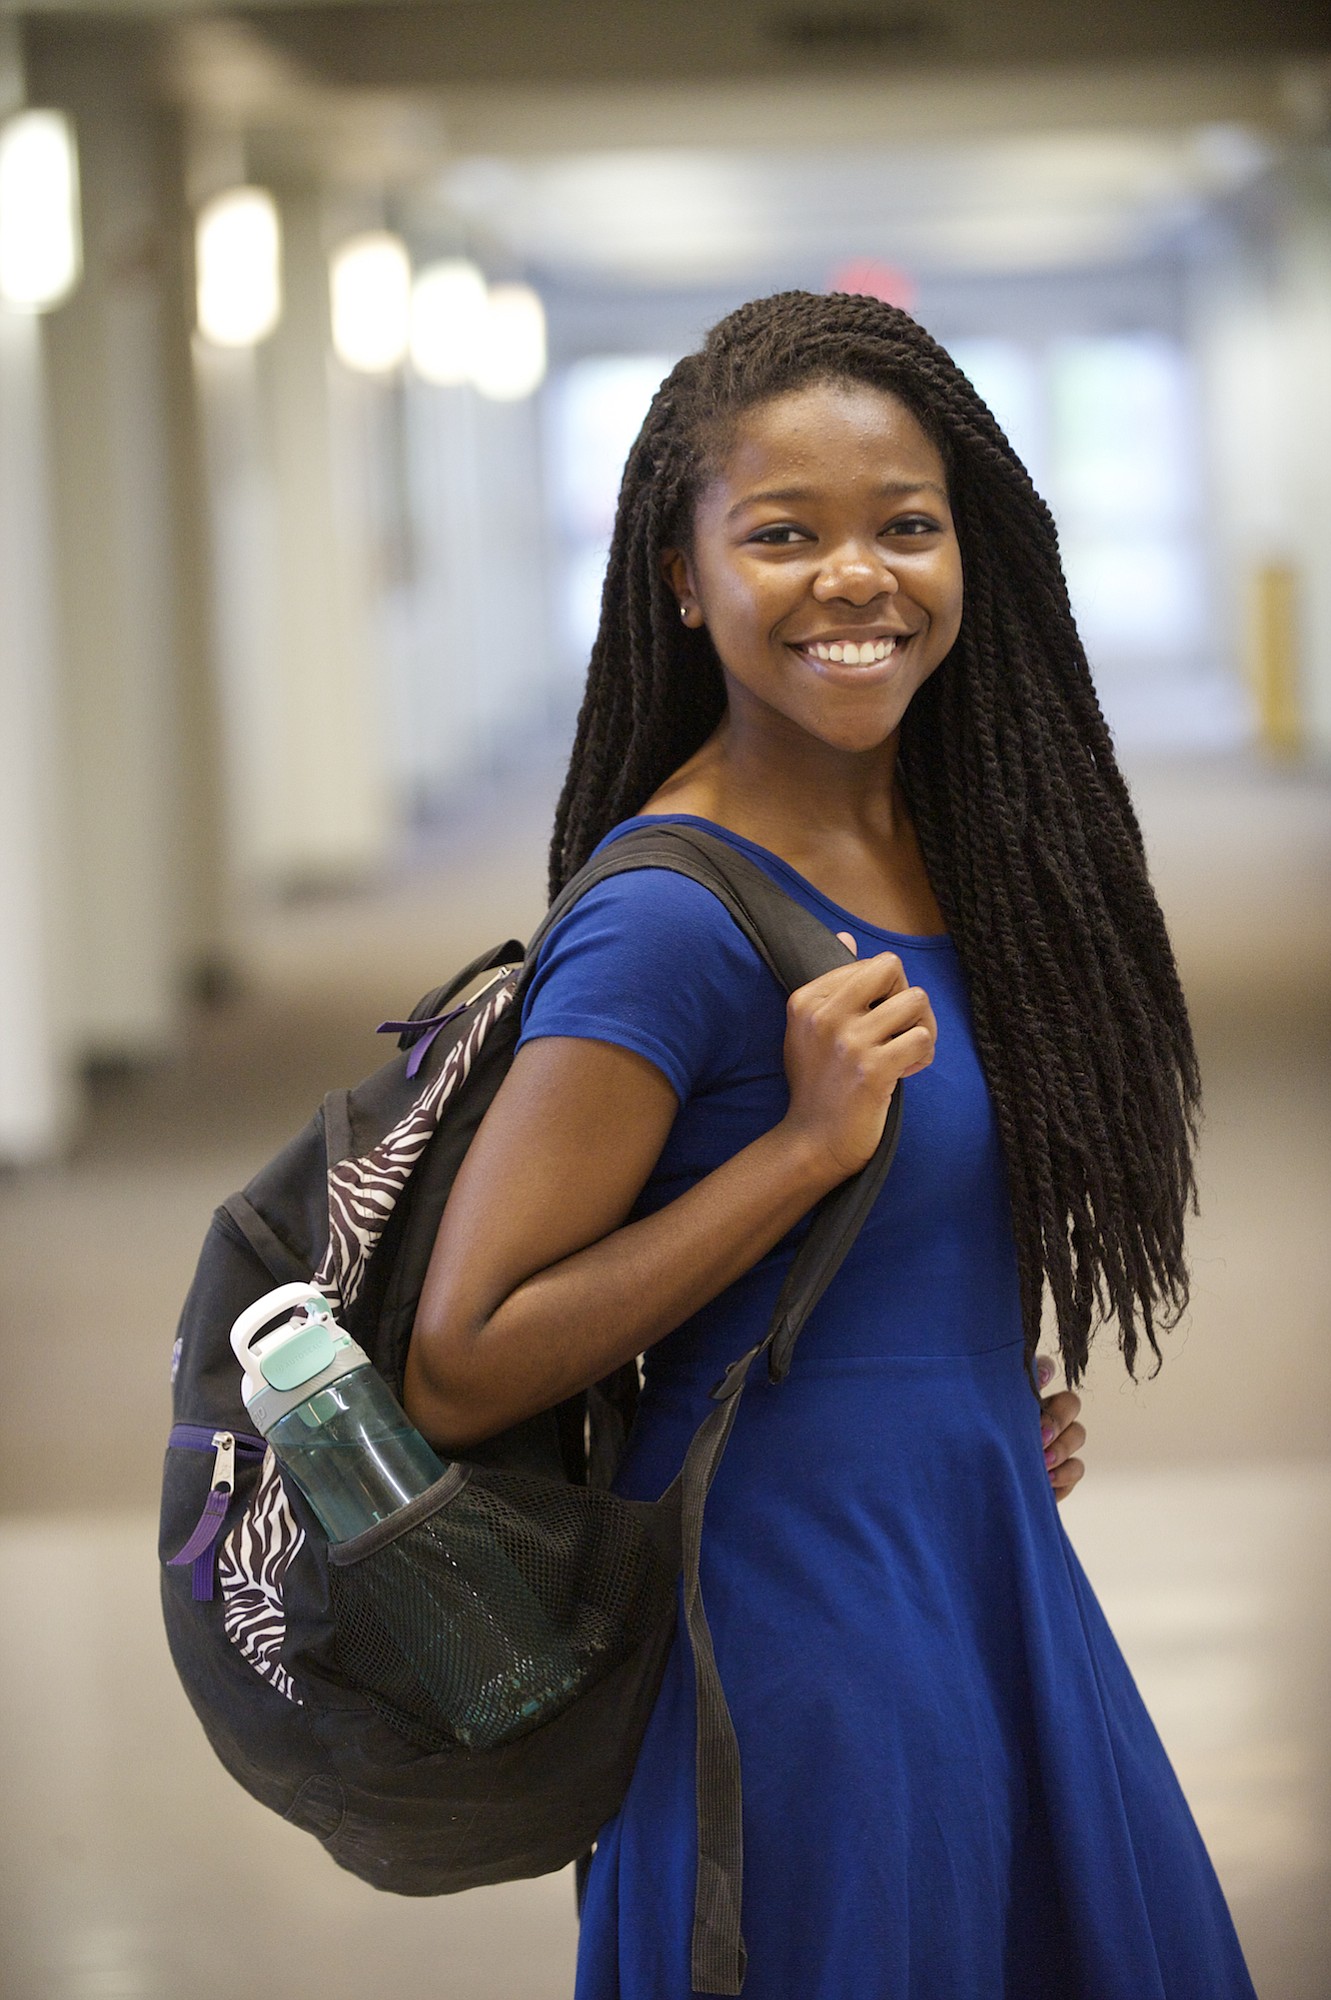 Jessica Ekeya, a senior in the International Baccalaureate magnet program at Columbia River High School, will attend Harvard University in the fall.